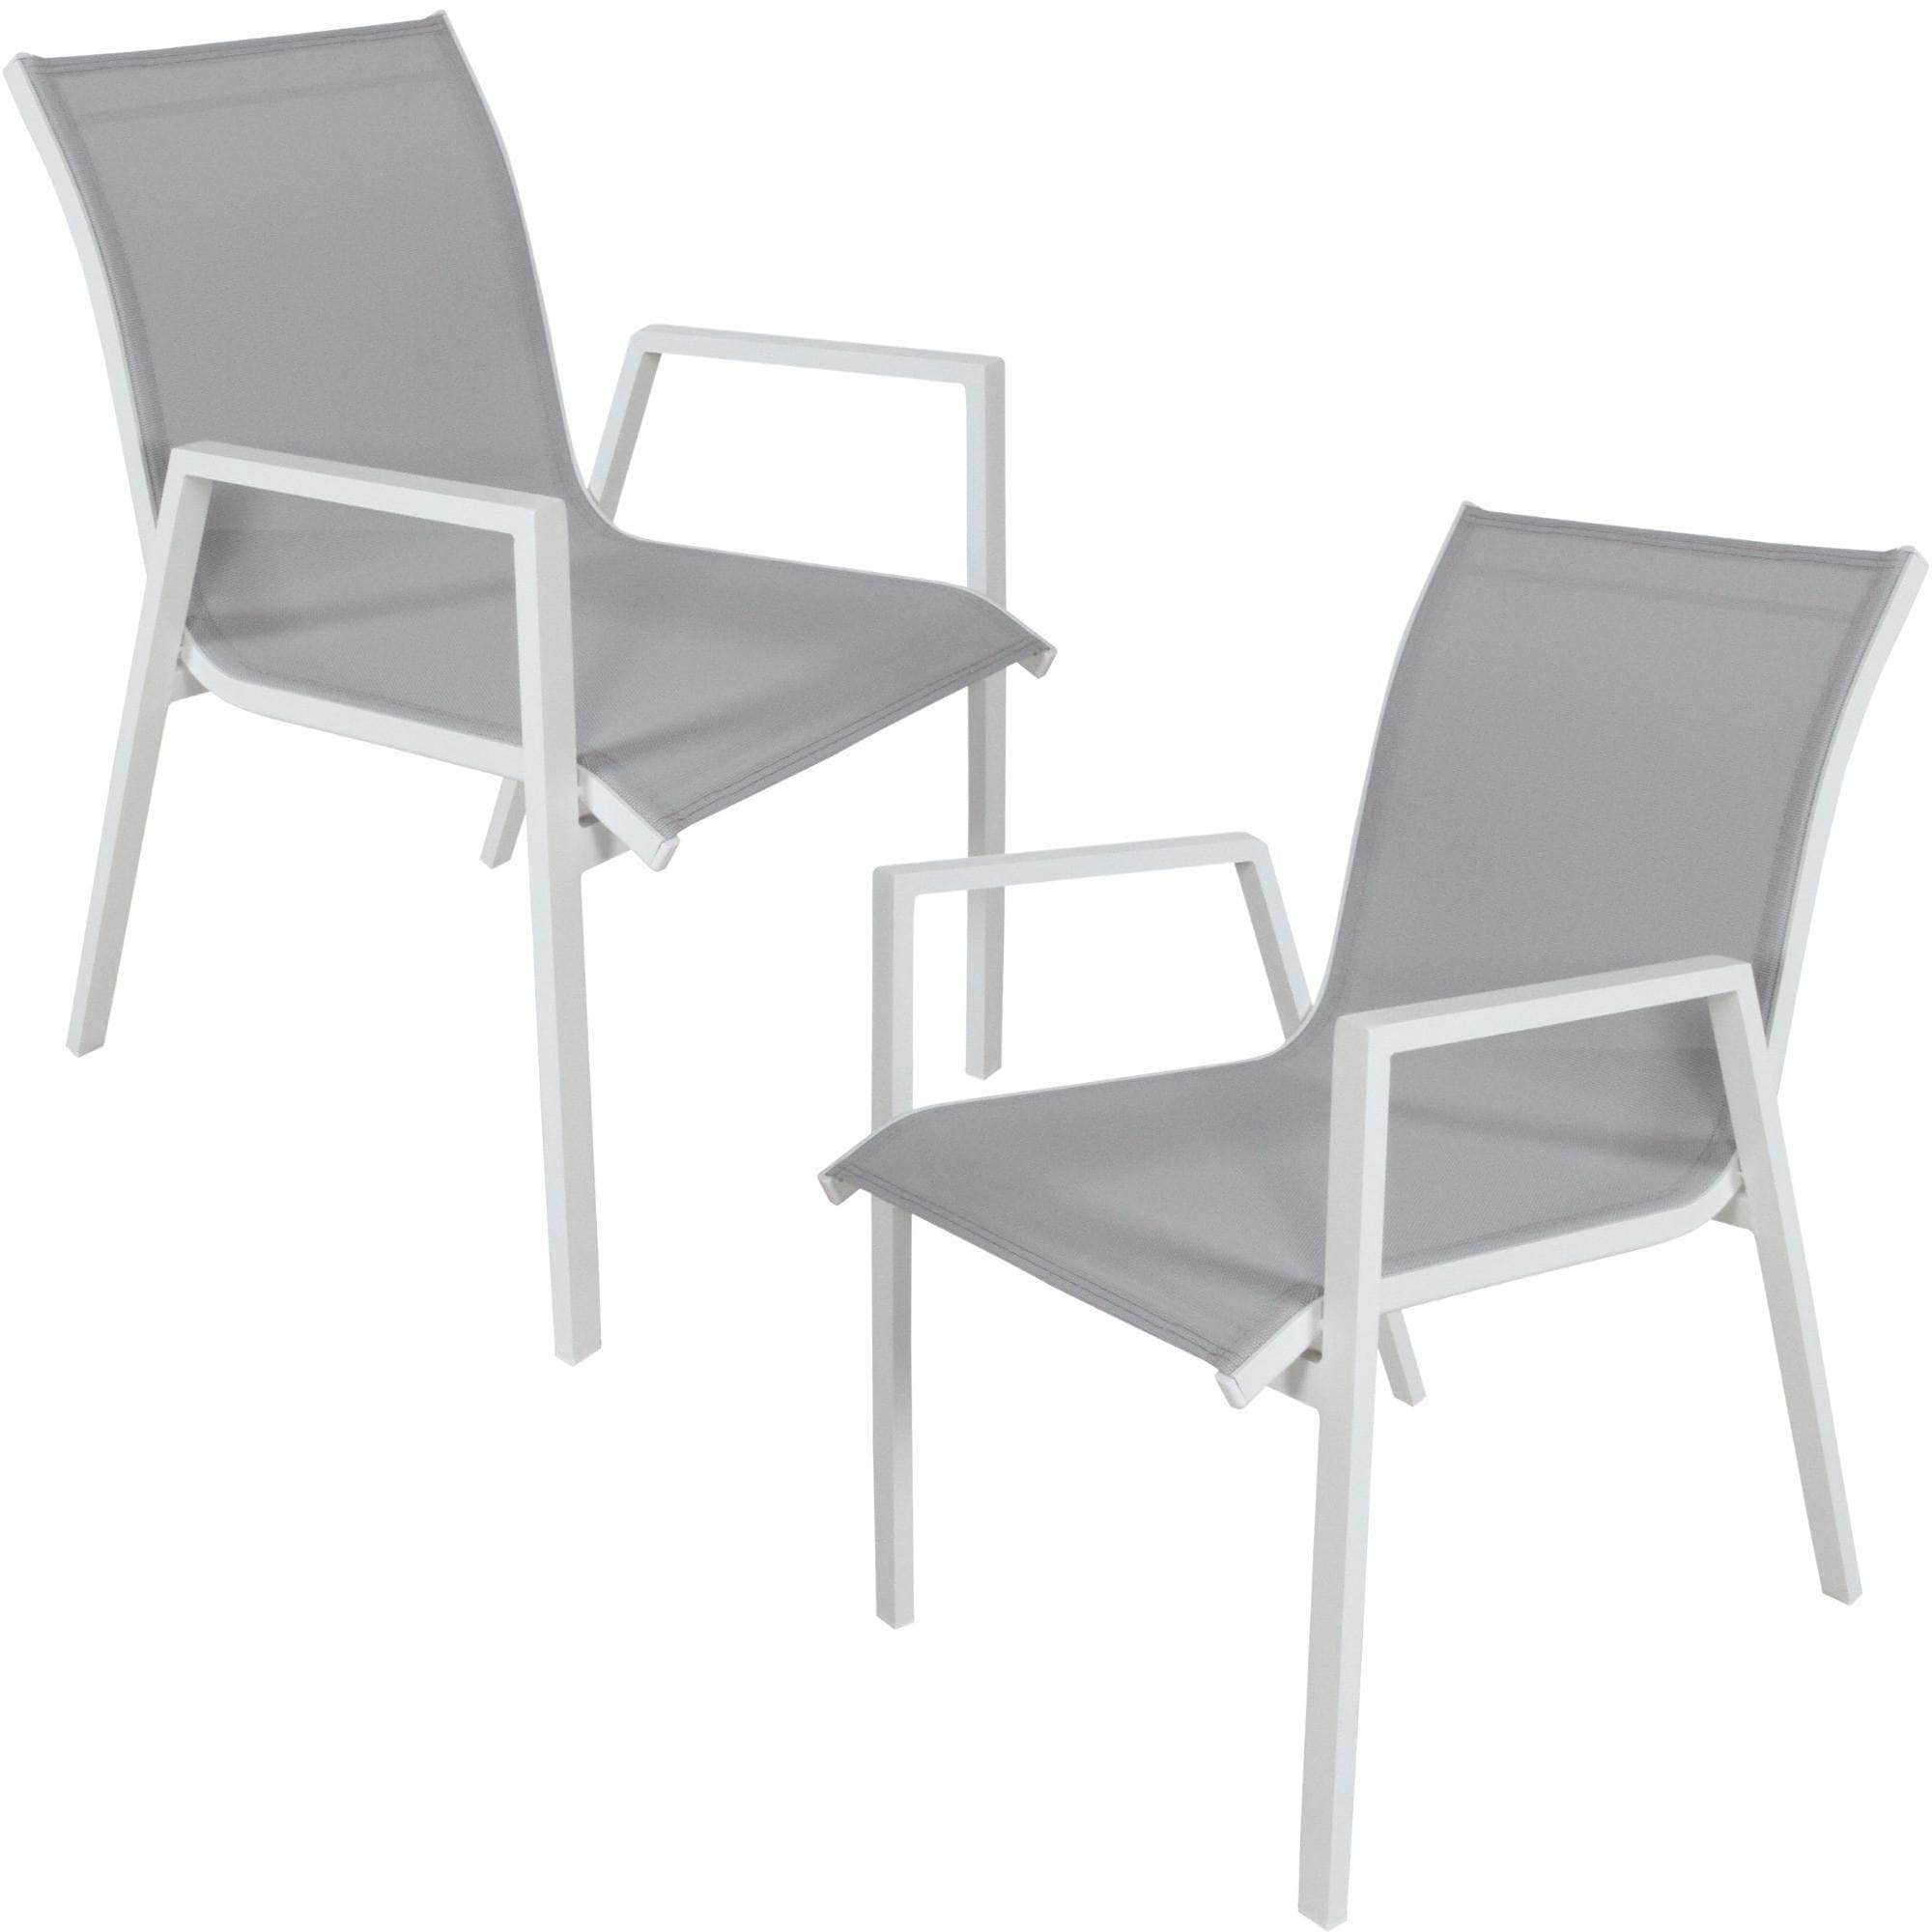 2Pc Set Aluminium Outdoor Dining Table Chair White